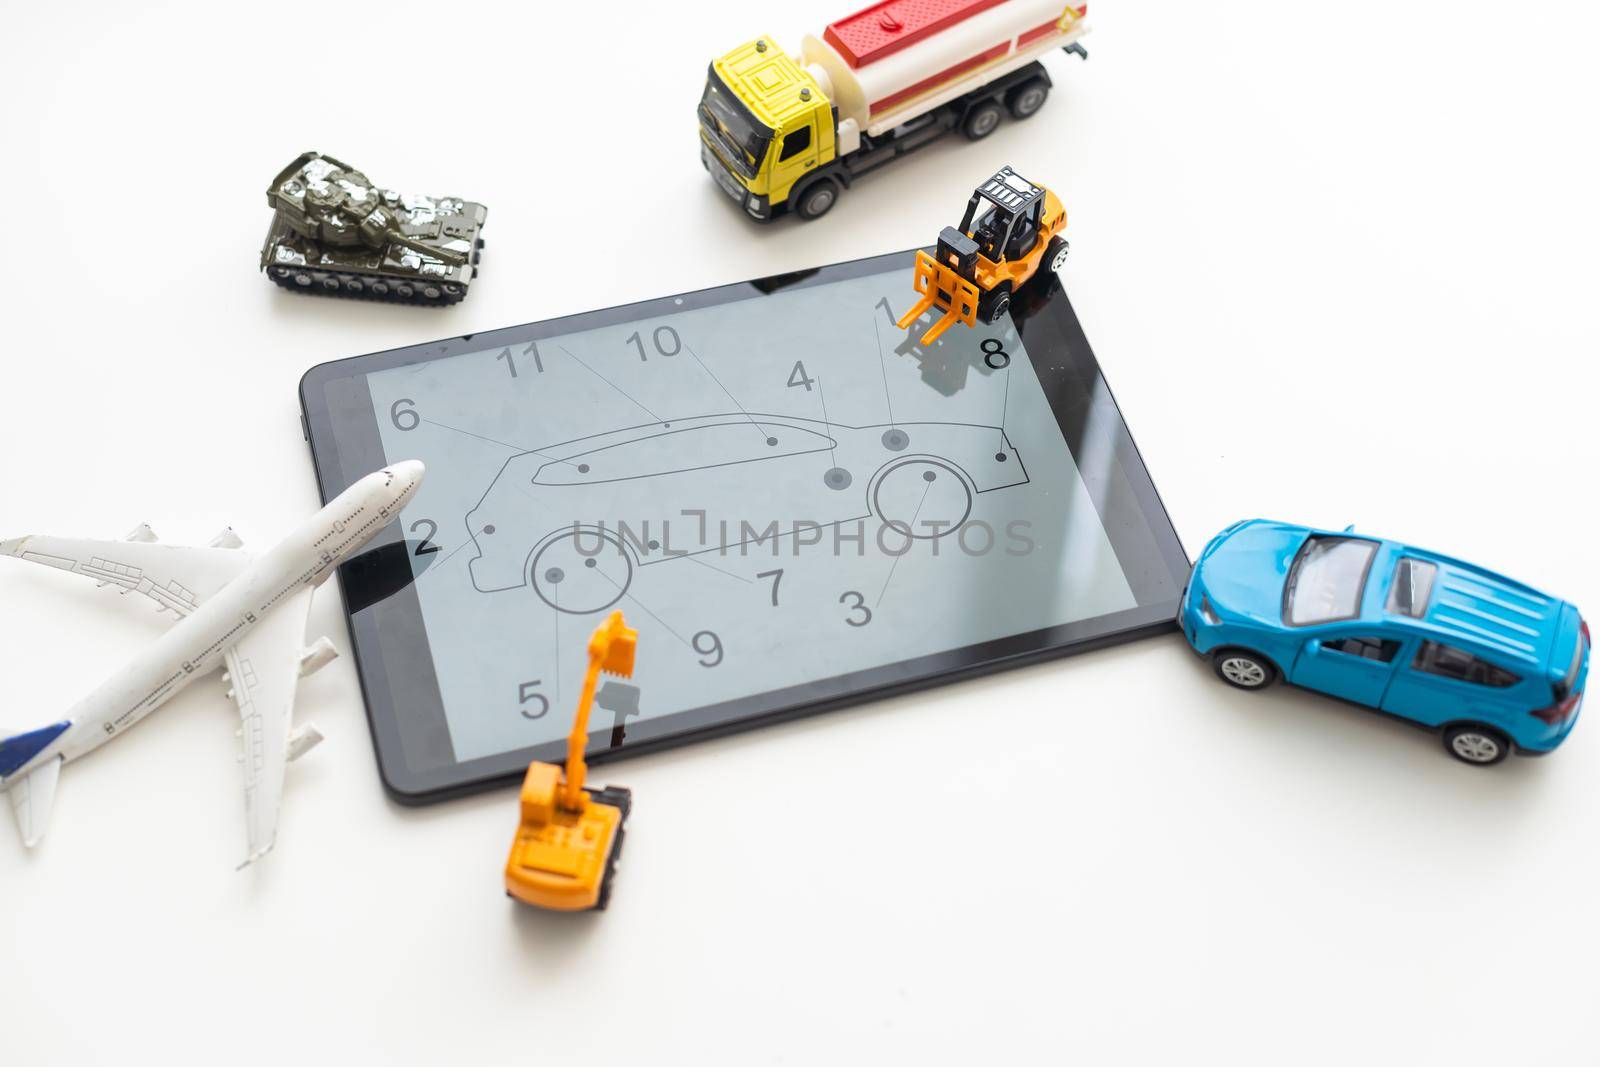 Tablet computer with different types of toy transport.